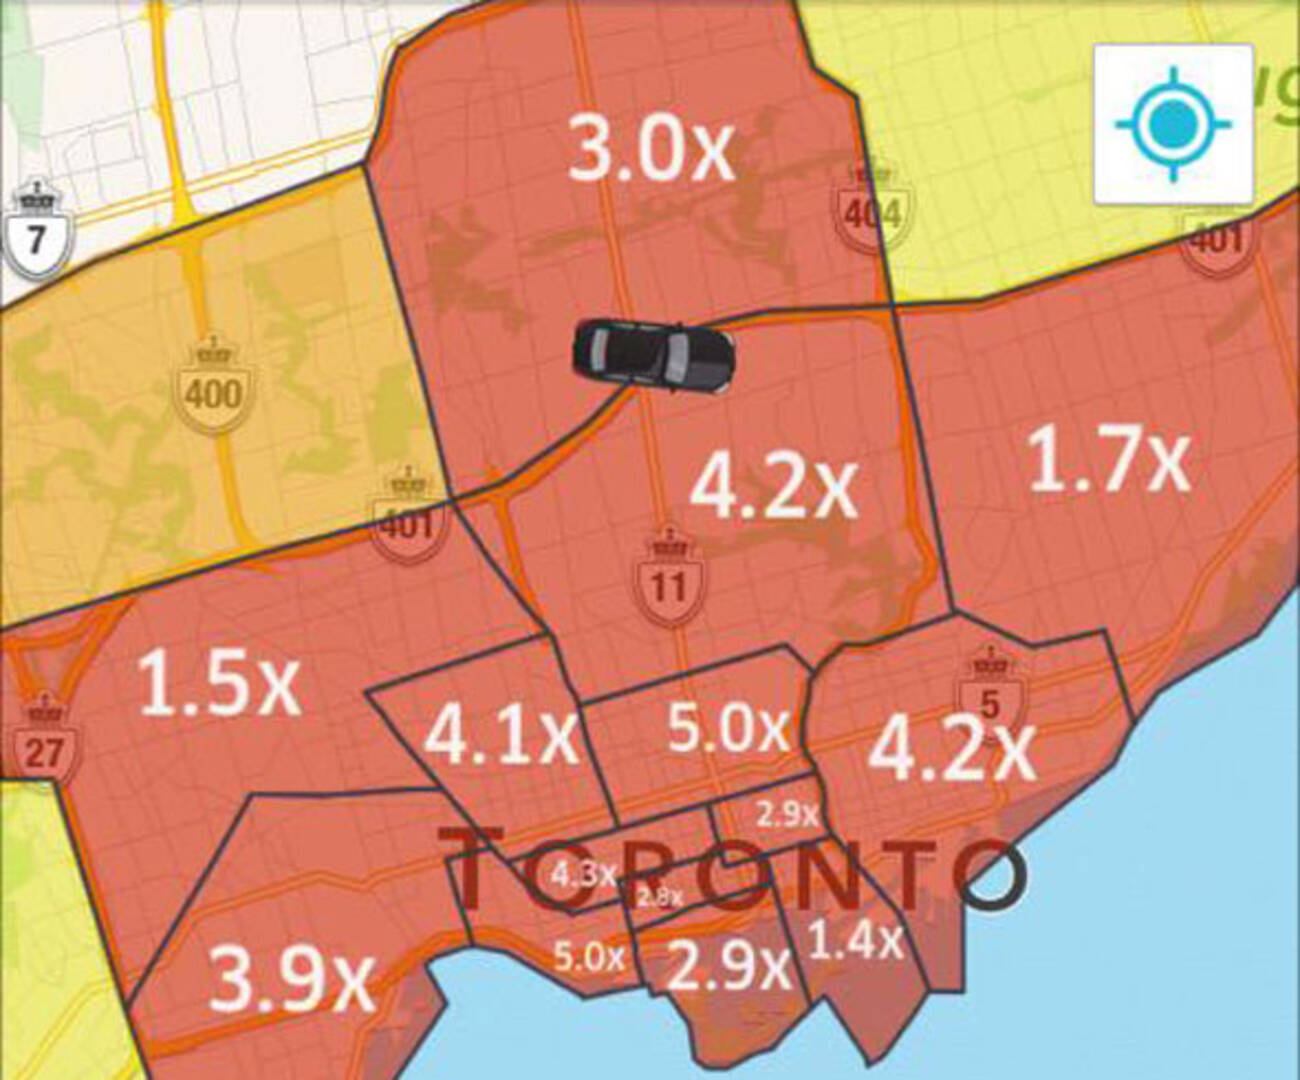 Uber takes heat for jacking prices during TTC outage1300 x 1080